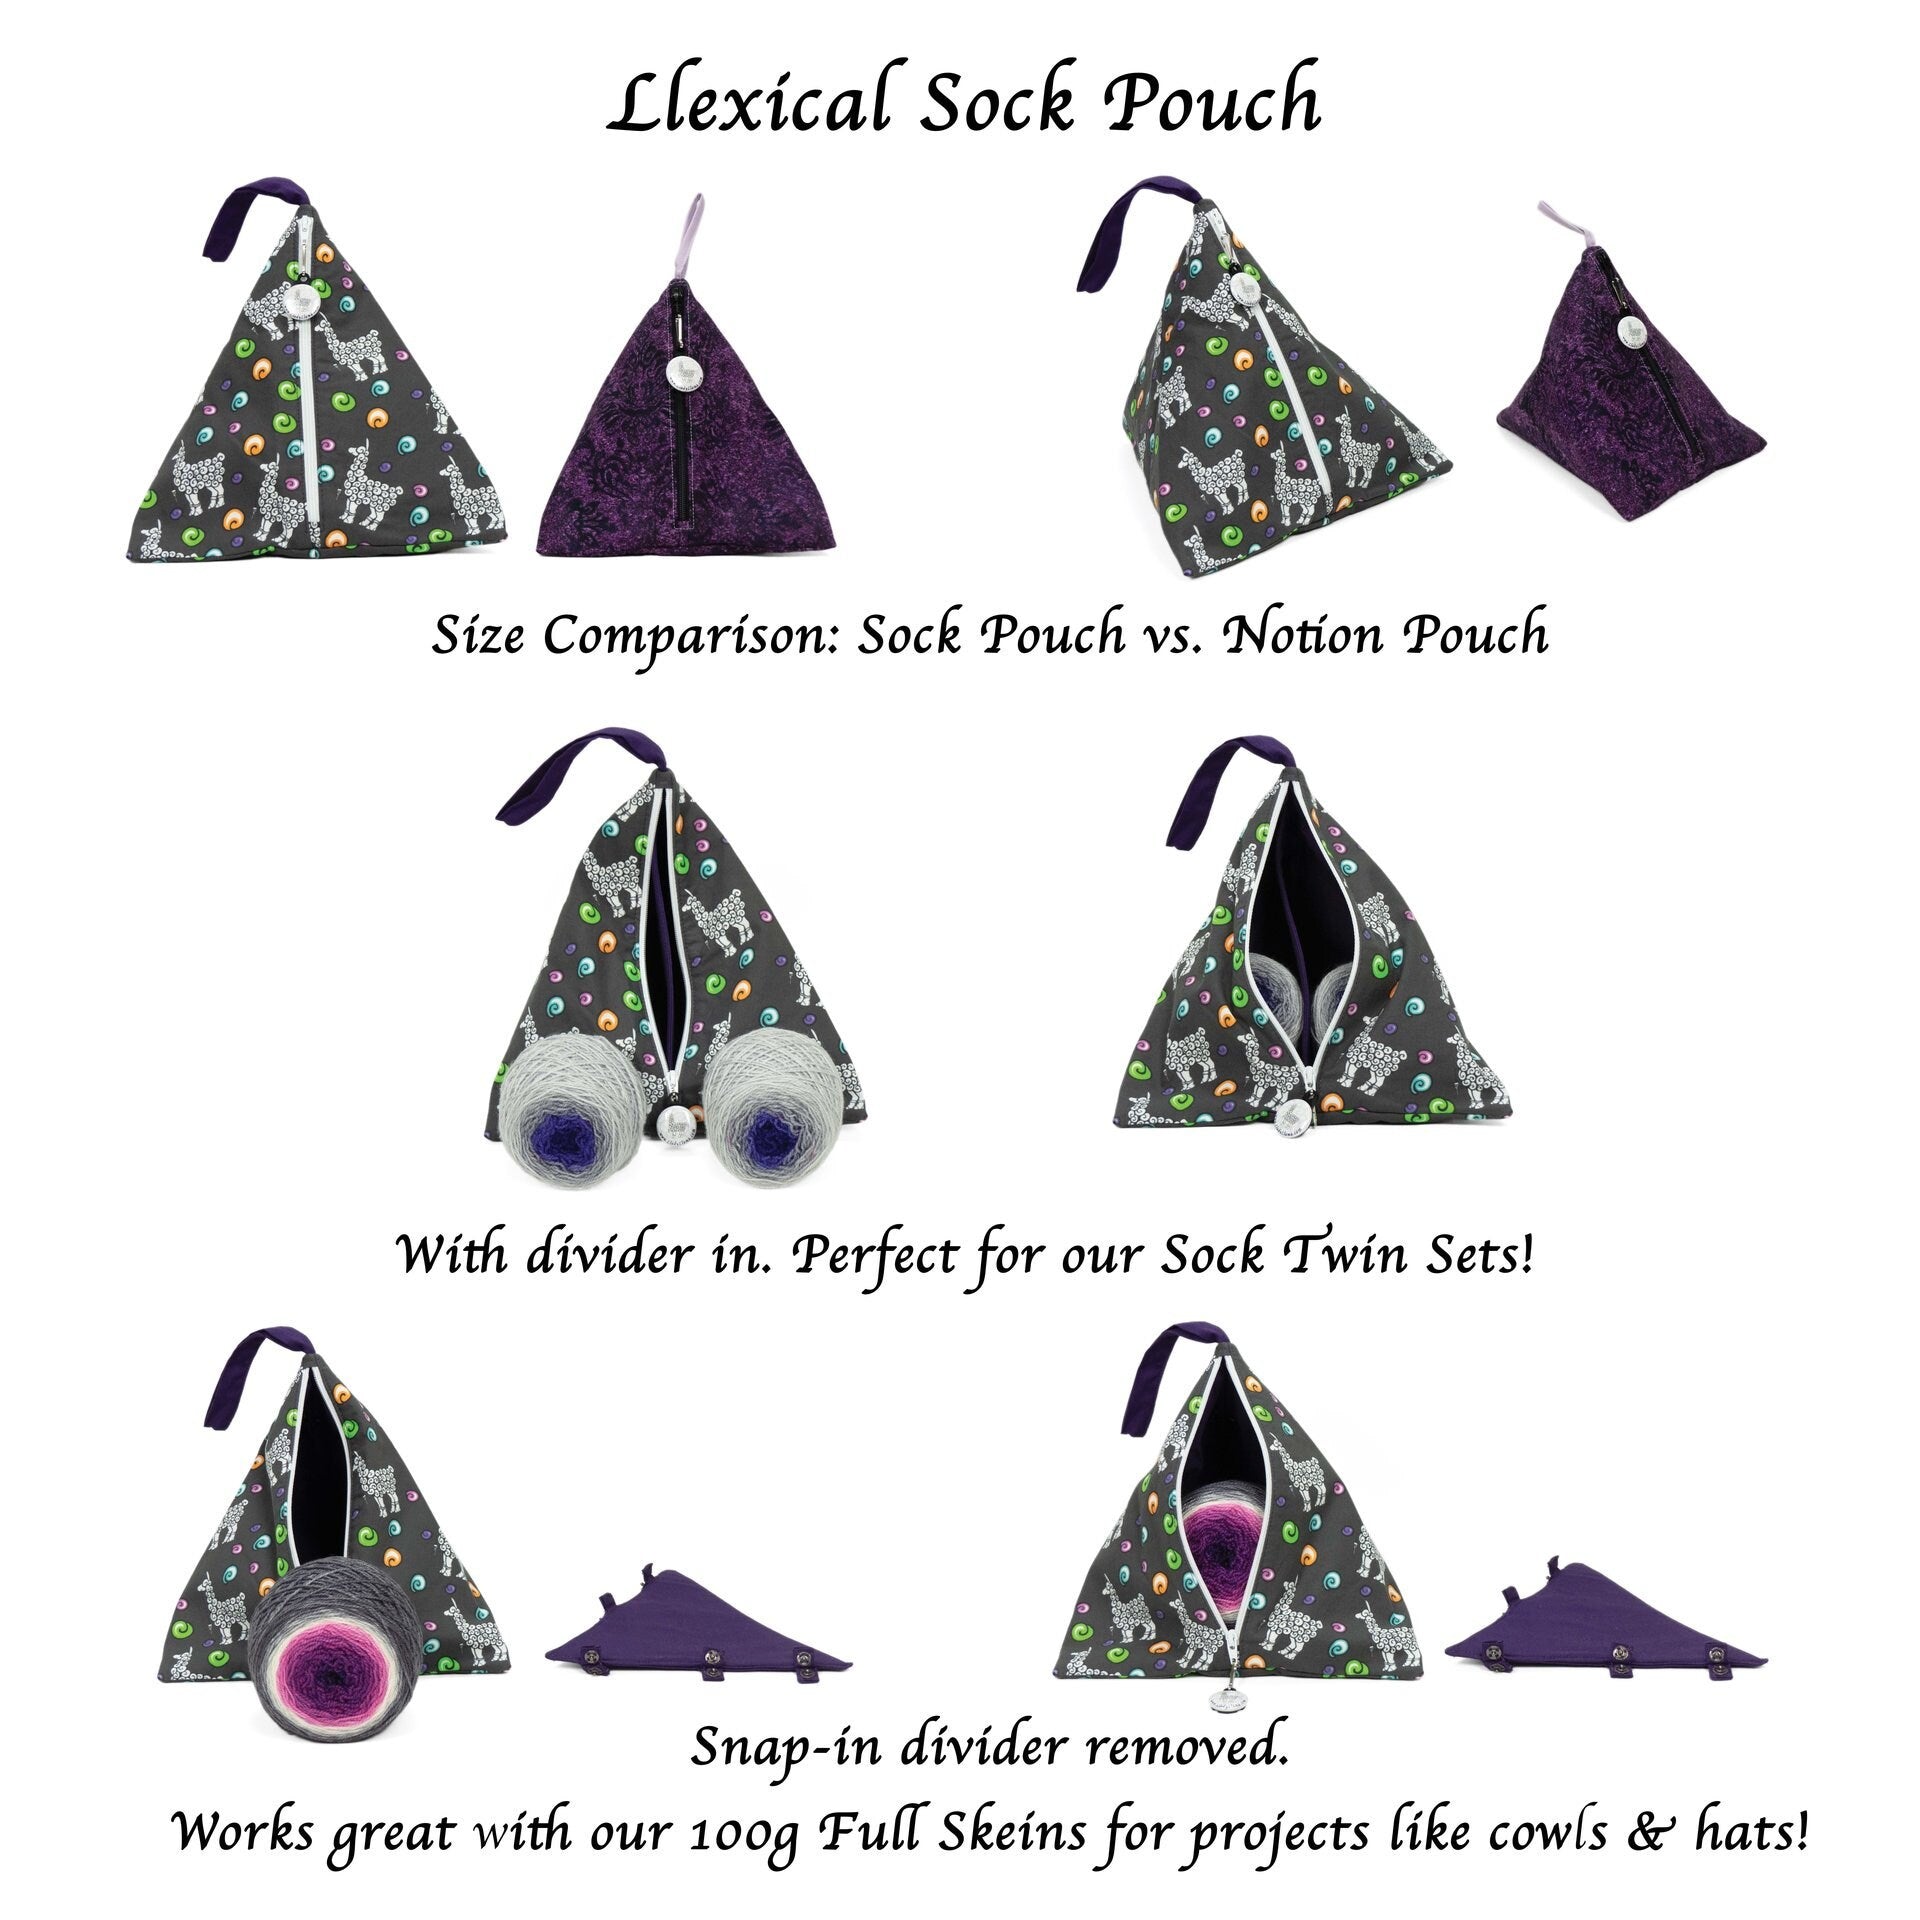 Retro Enamel Pin - Llexical Divided Sock Pouch - Knitting, Crochet, Spinning Project Bag